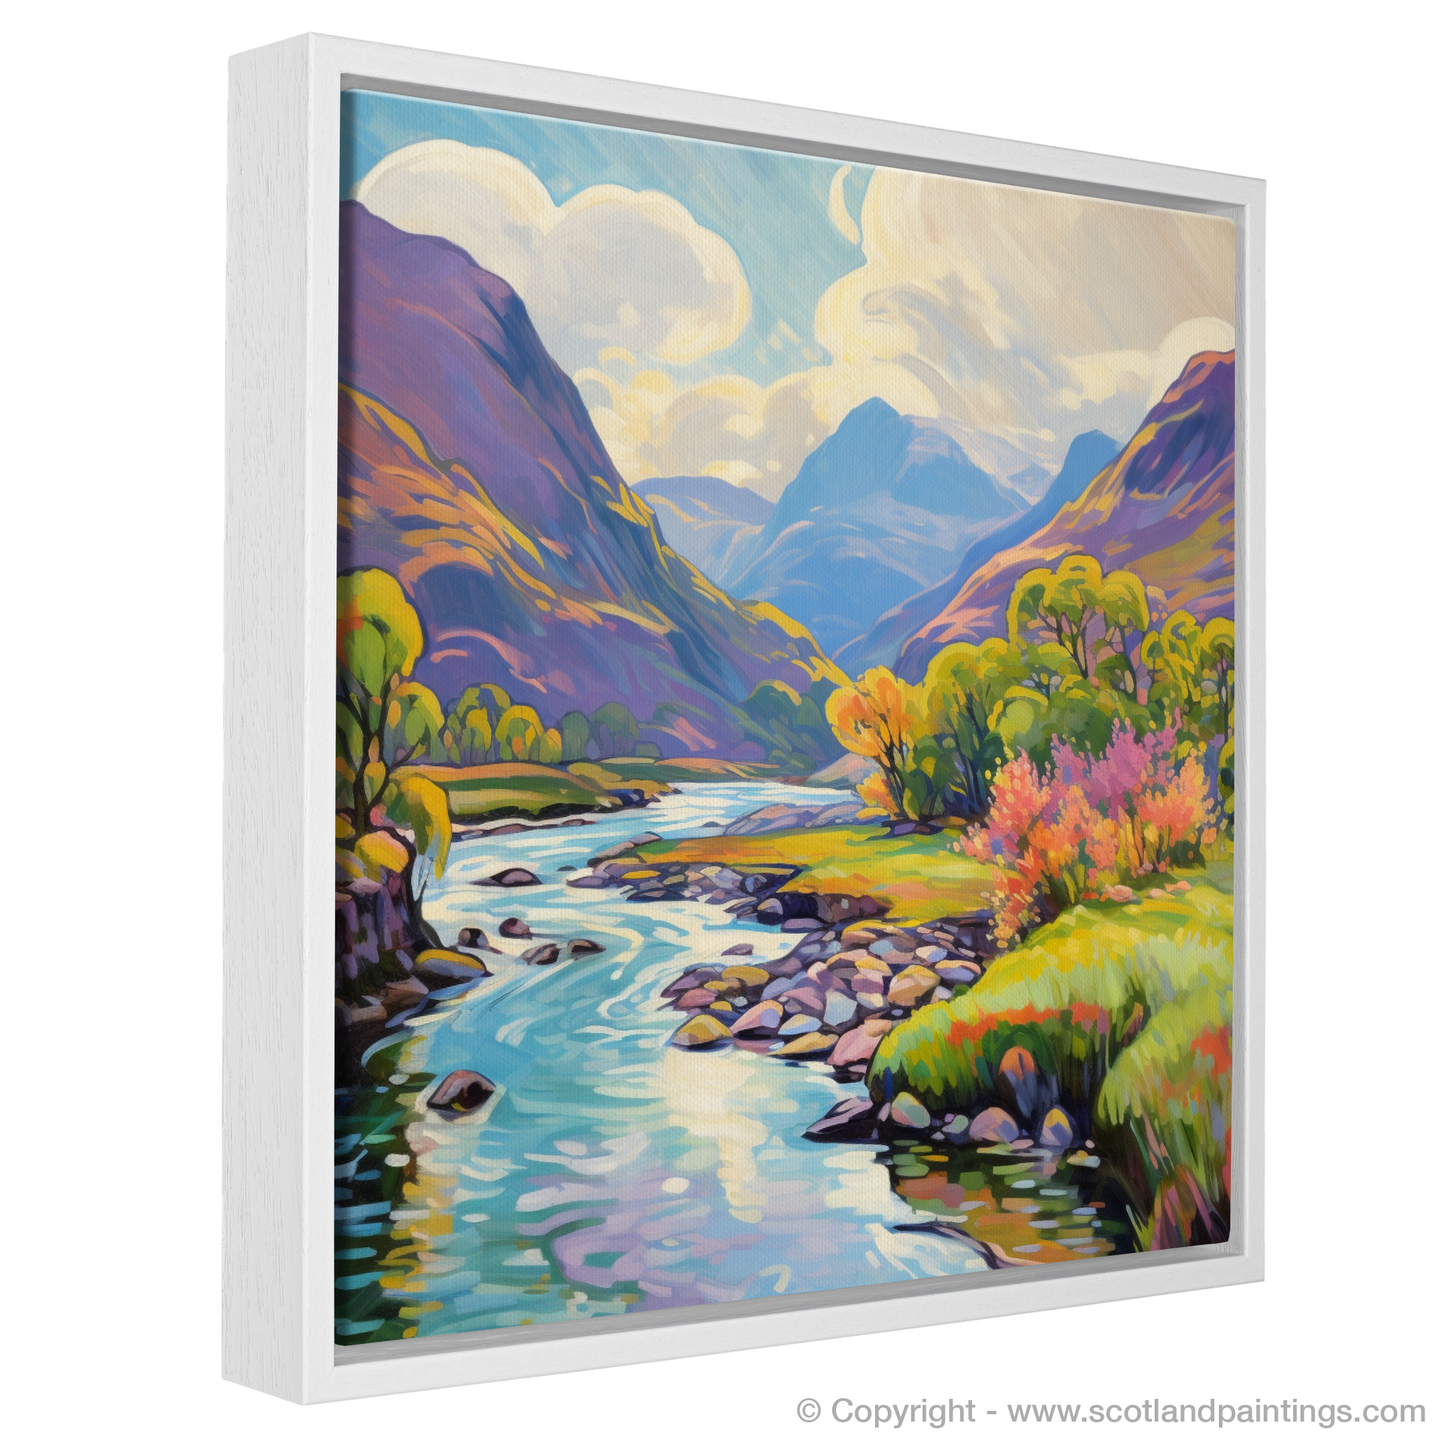 Painting and Art Print of River in Glencoe during summer entitled "Summer Serenade on the River in Glencoe".